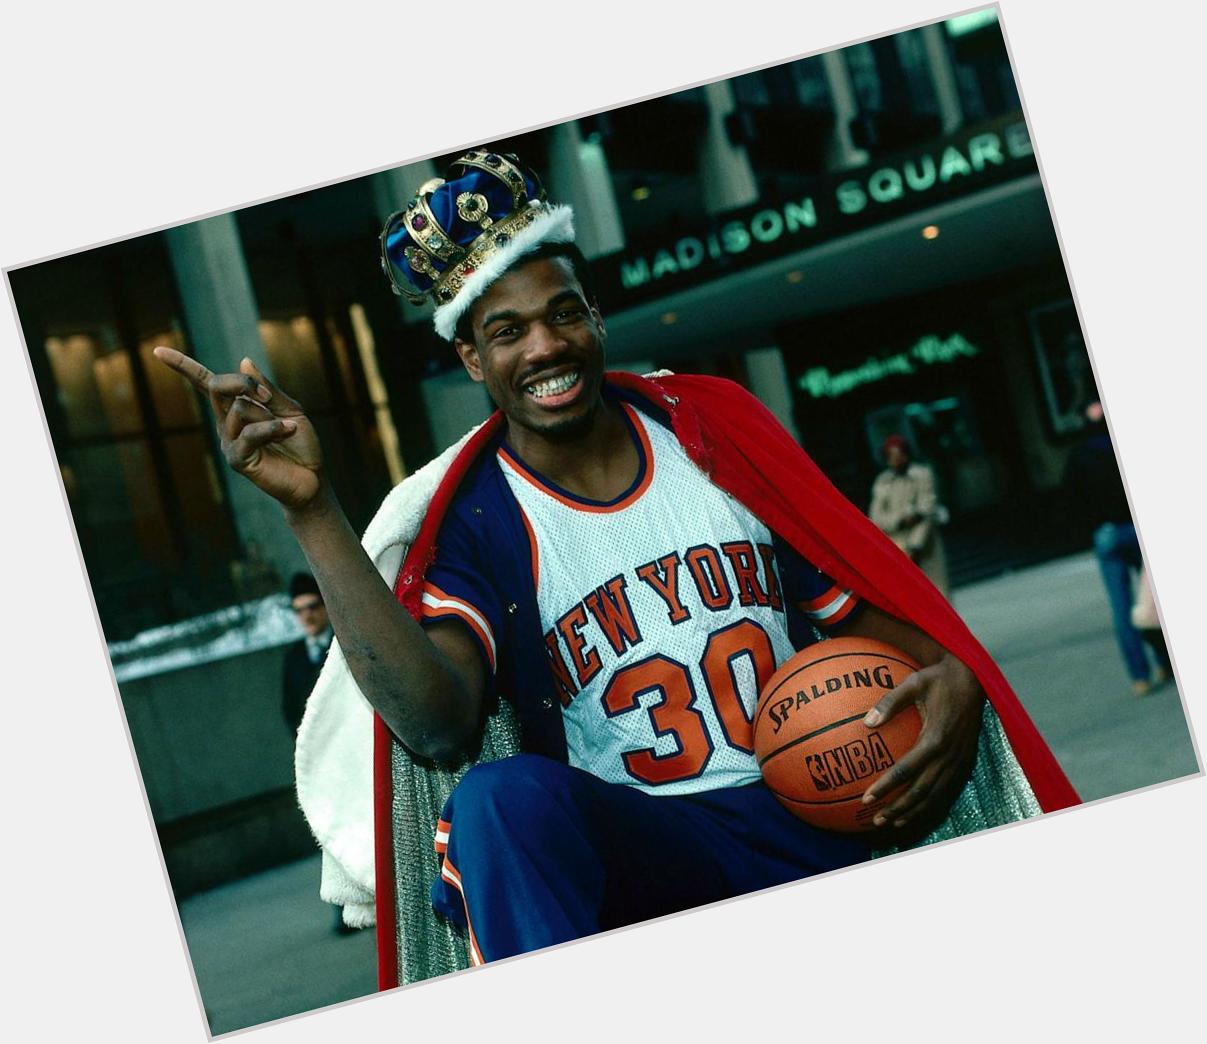 Happy birthday bernard king I honor you on nba live my rising star player got your last name in Jordan first name 